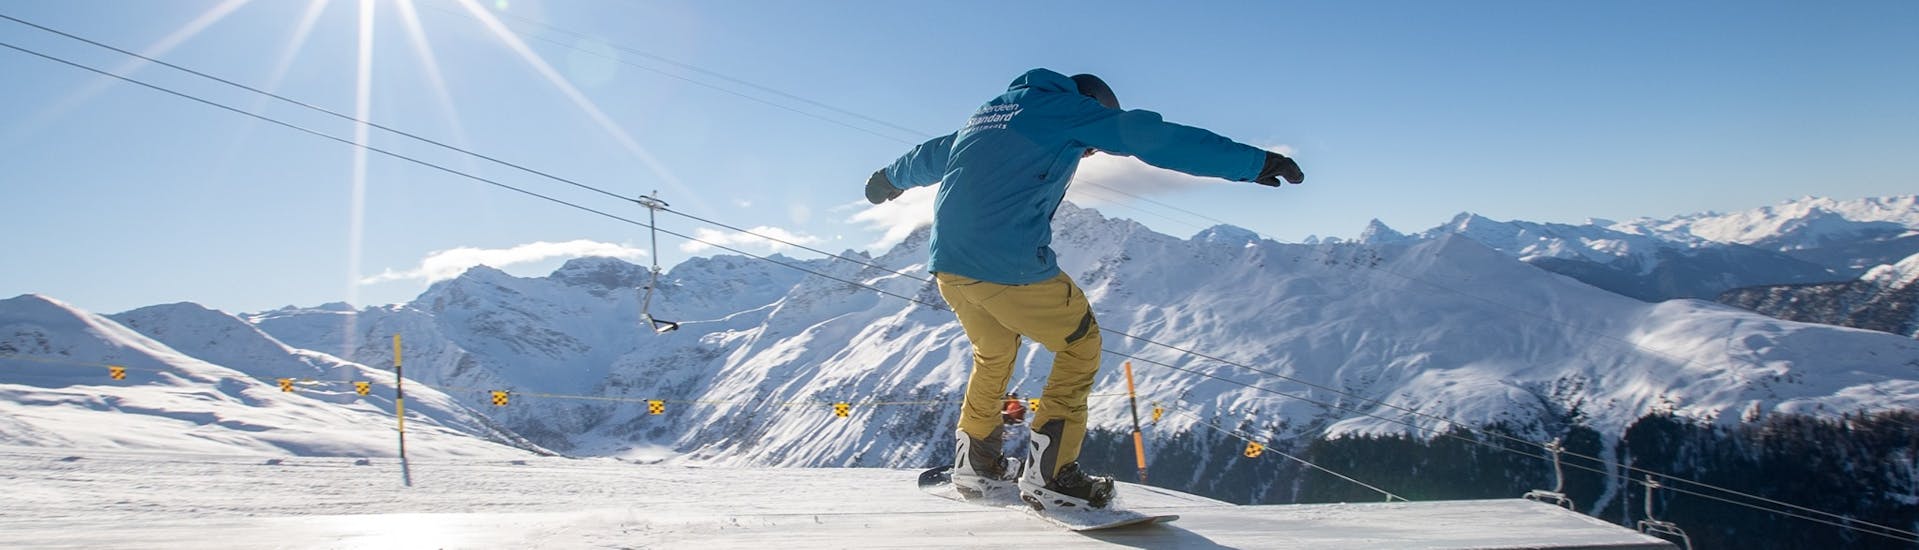 A snowboarder is doing tricks during private snowboarding lessons for kids and adults for advanced snowboarders with Swiss Ski School Davos.